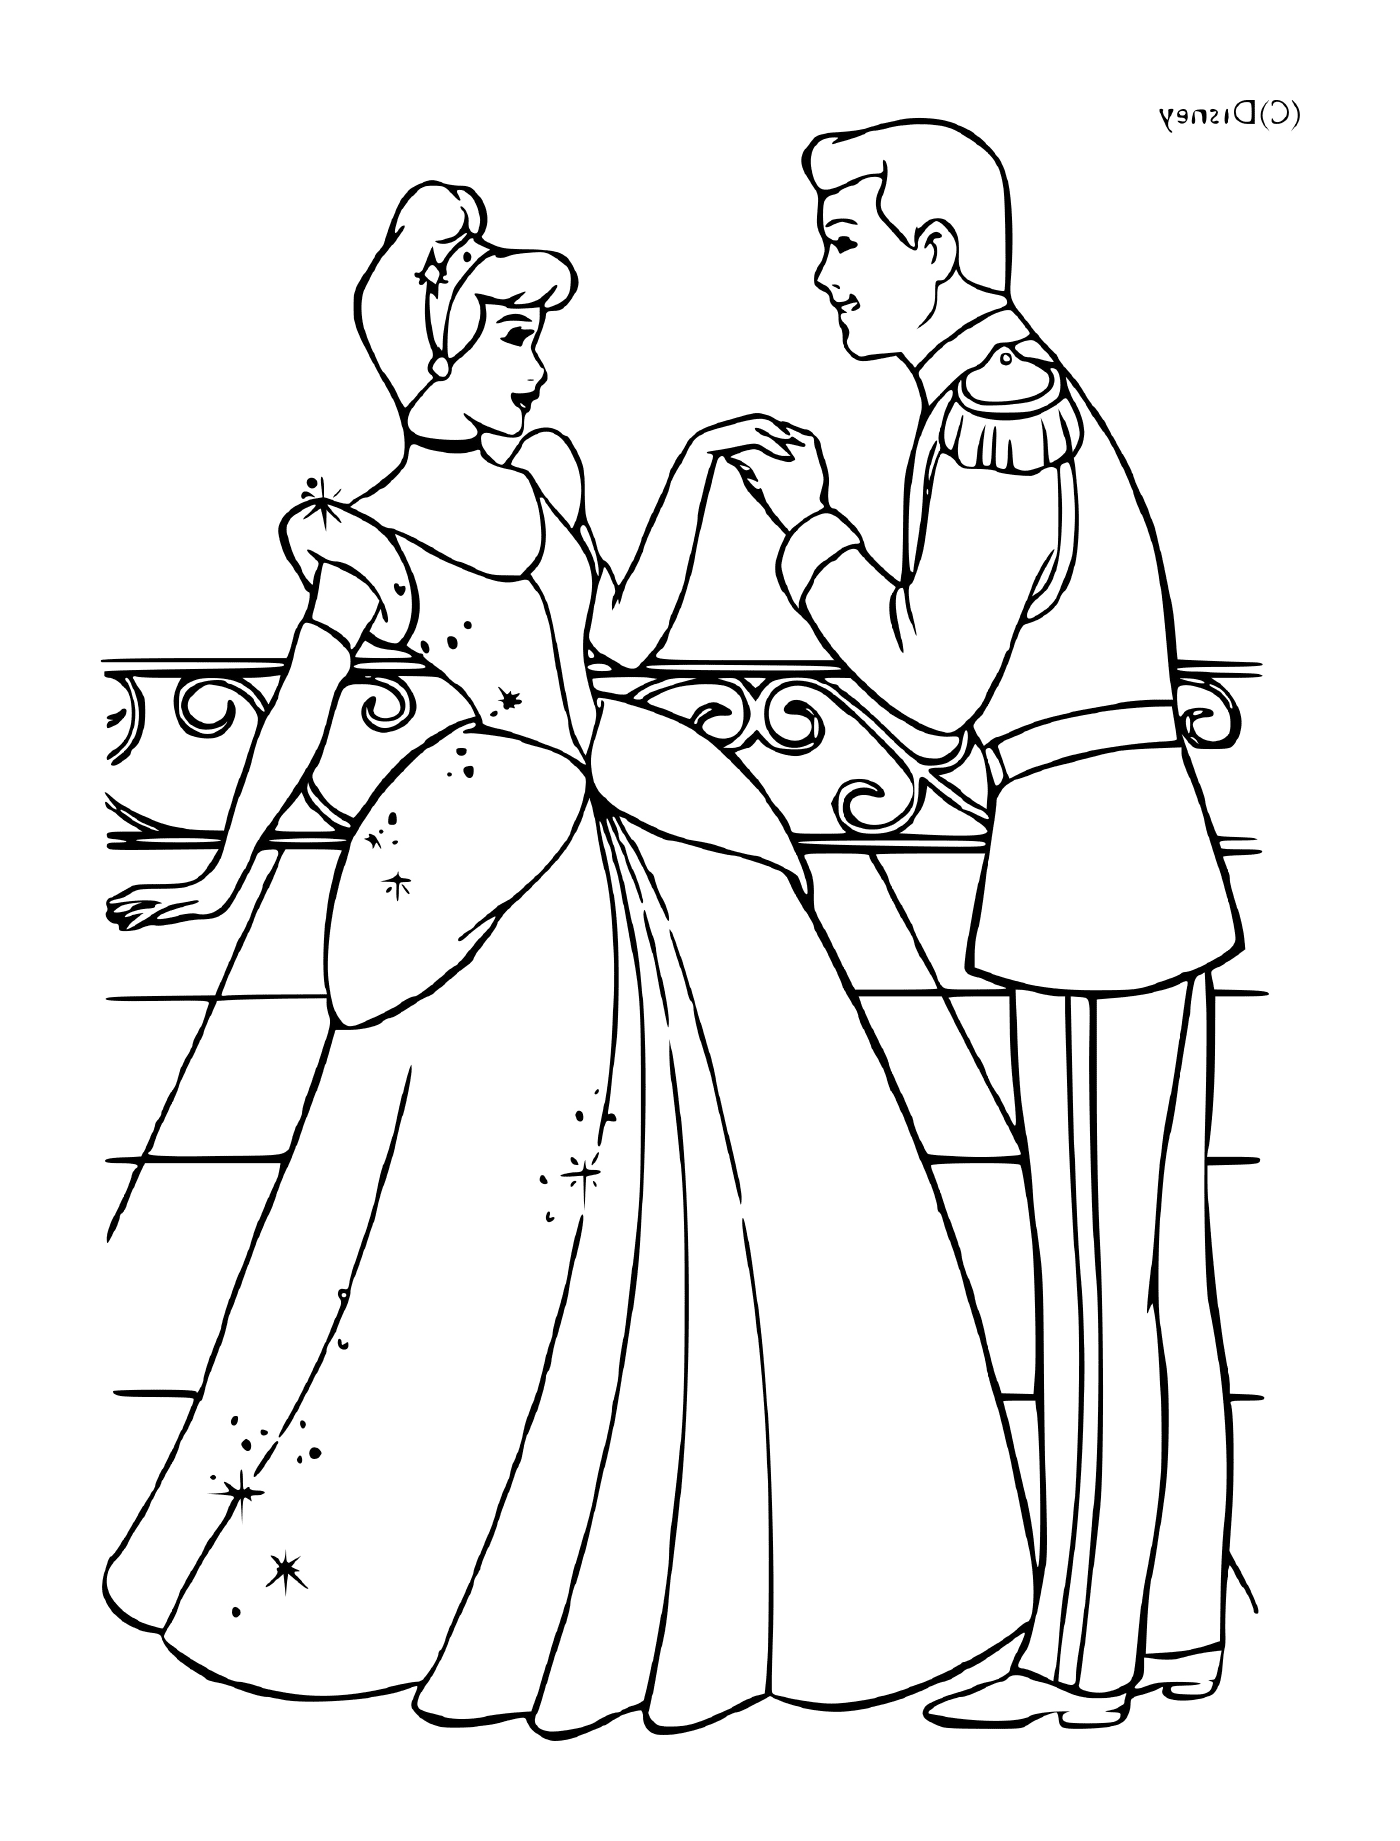  Cinderella and her charming prince 